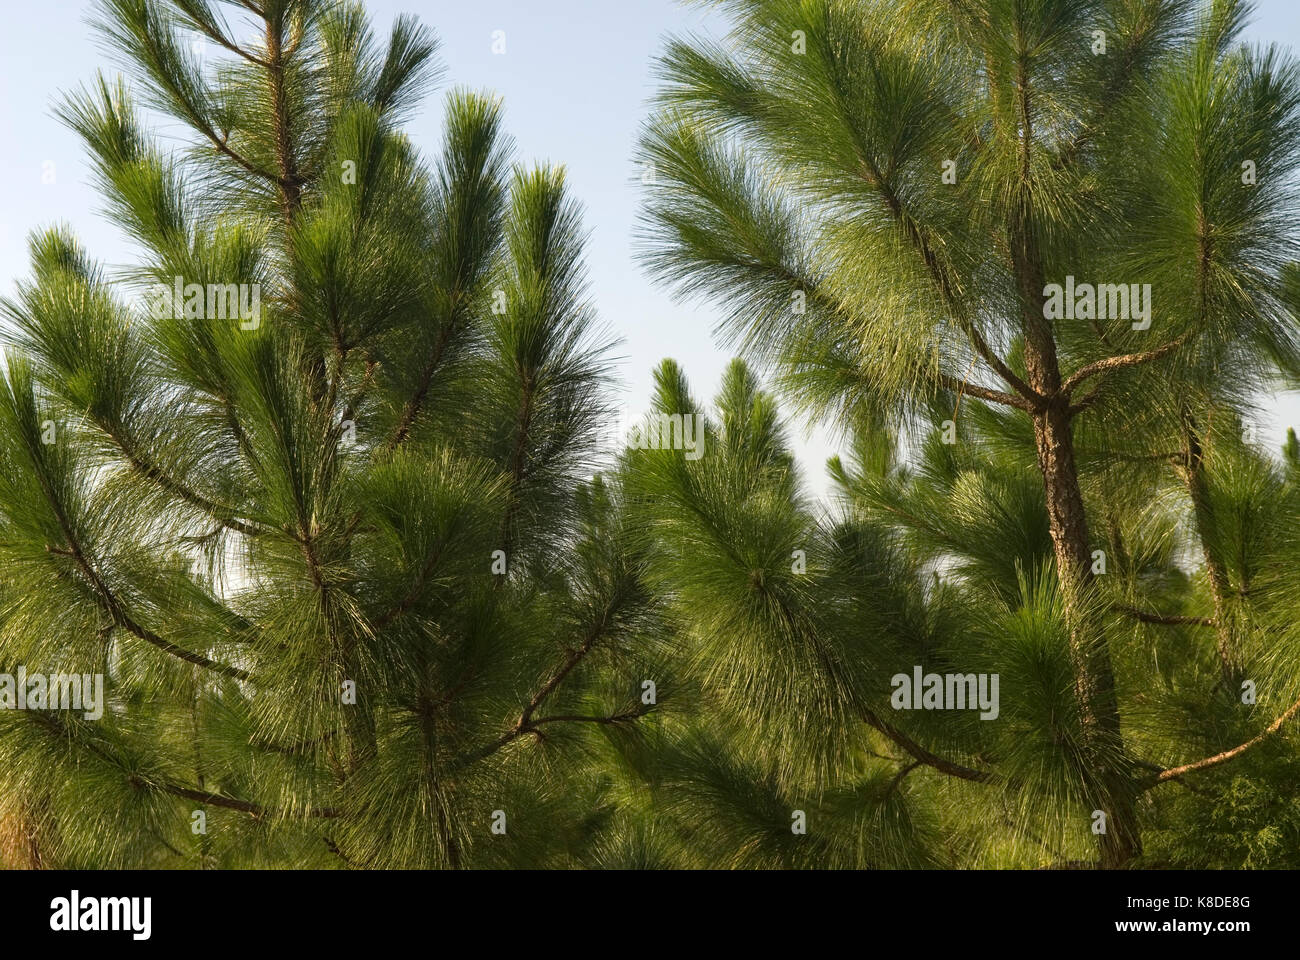 Long leafpine trees, Bethune, South Carolina, USA. Long leaf pine trees are used for mulch in landscaping. Stock Photo